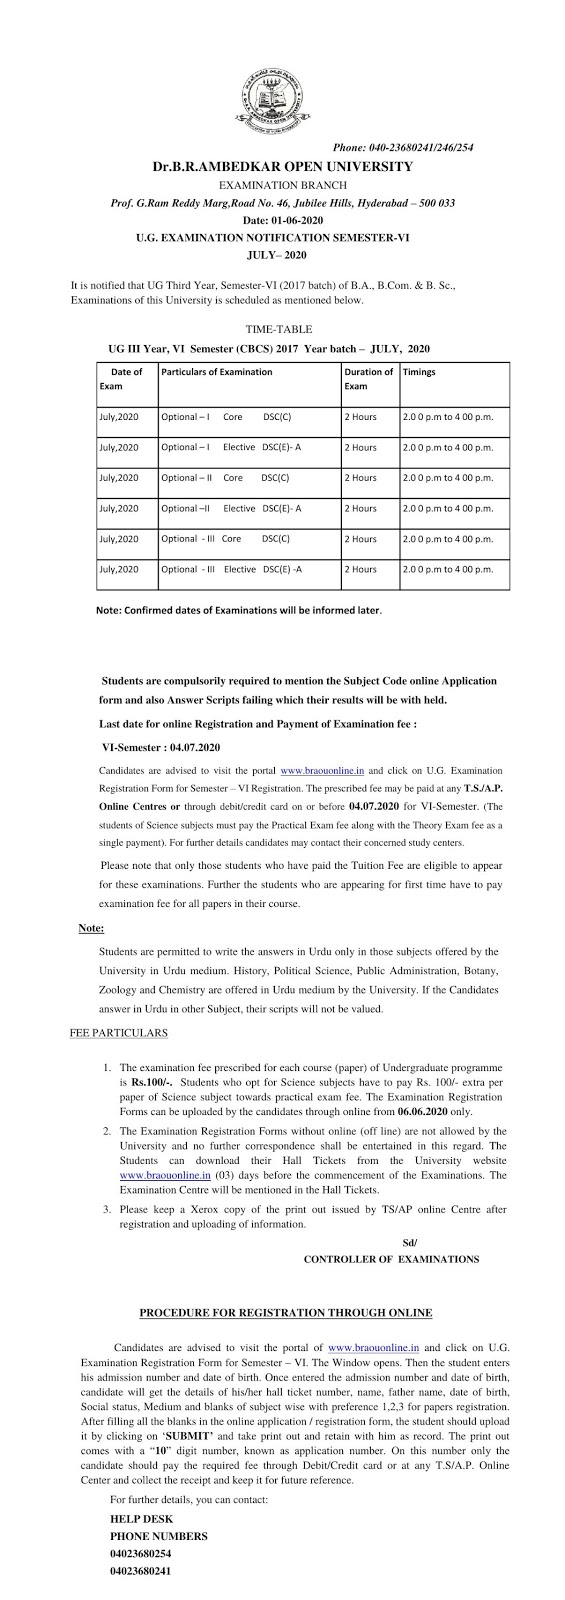 dr braou ug 6th sem july 2020 exam fee notification with time table